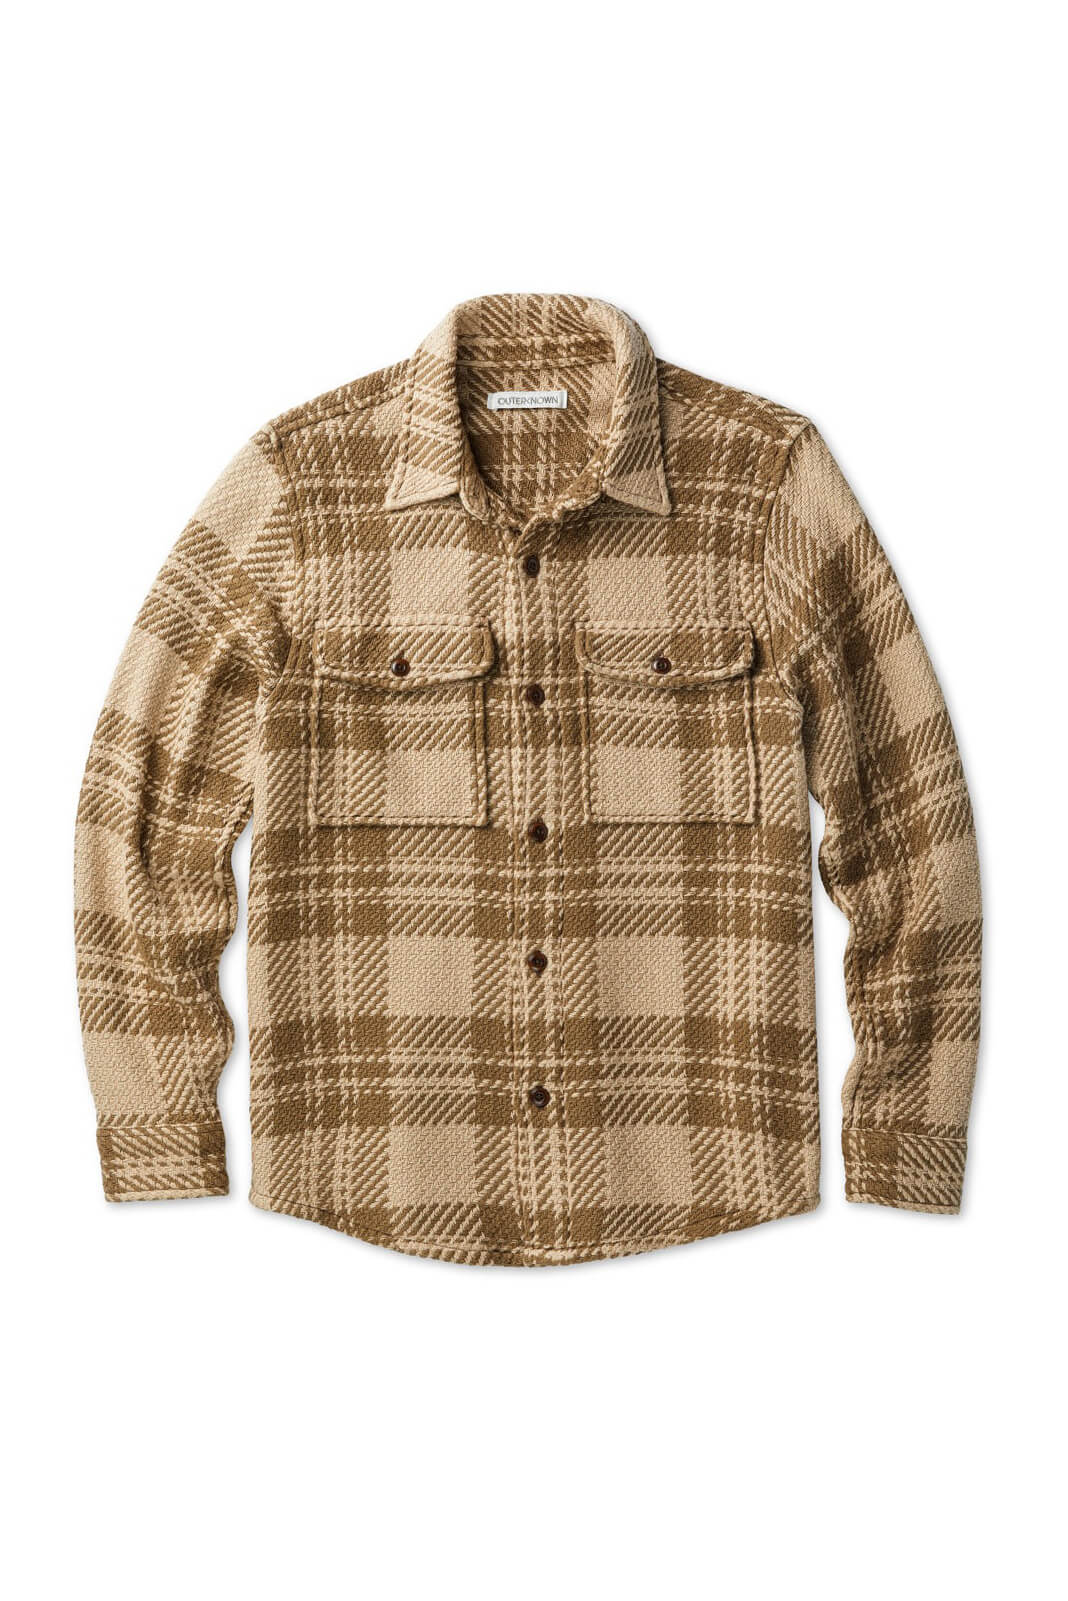 Outerknown cloud weave shirt in tawny wood